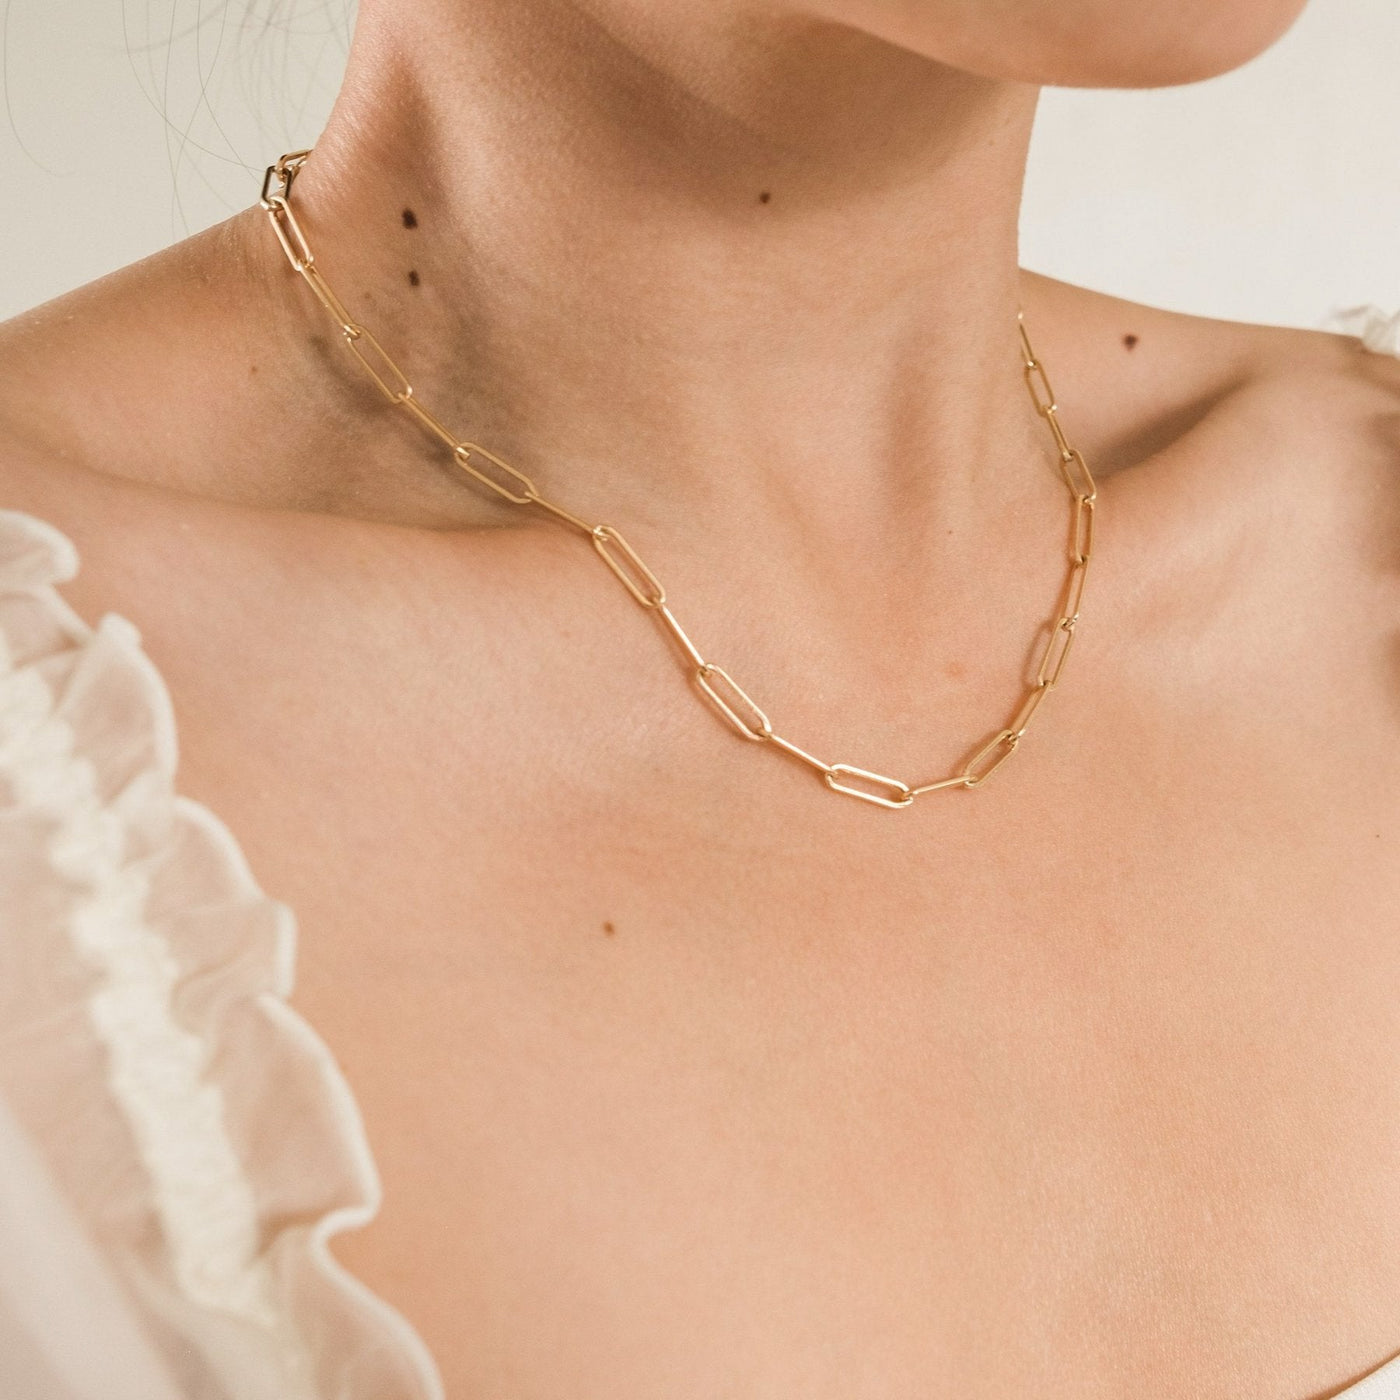 Chunky Paperclip Chain Necklace